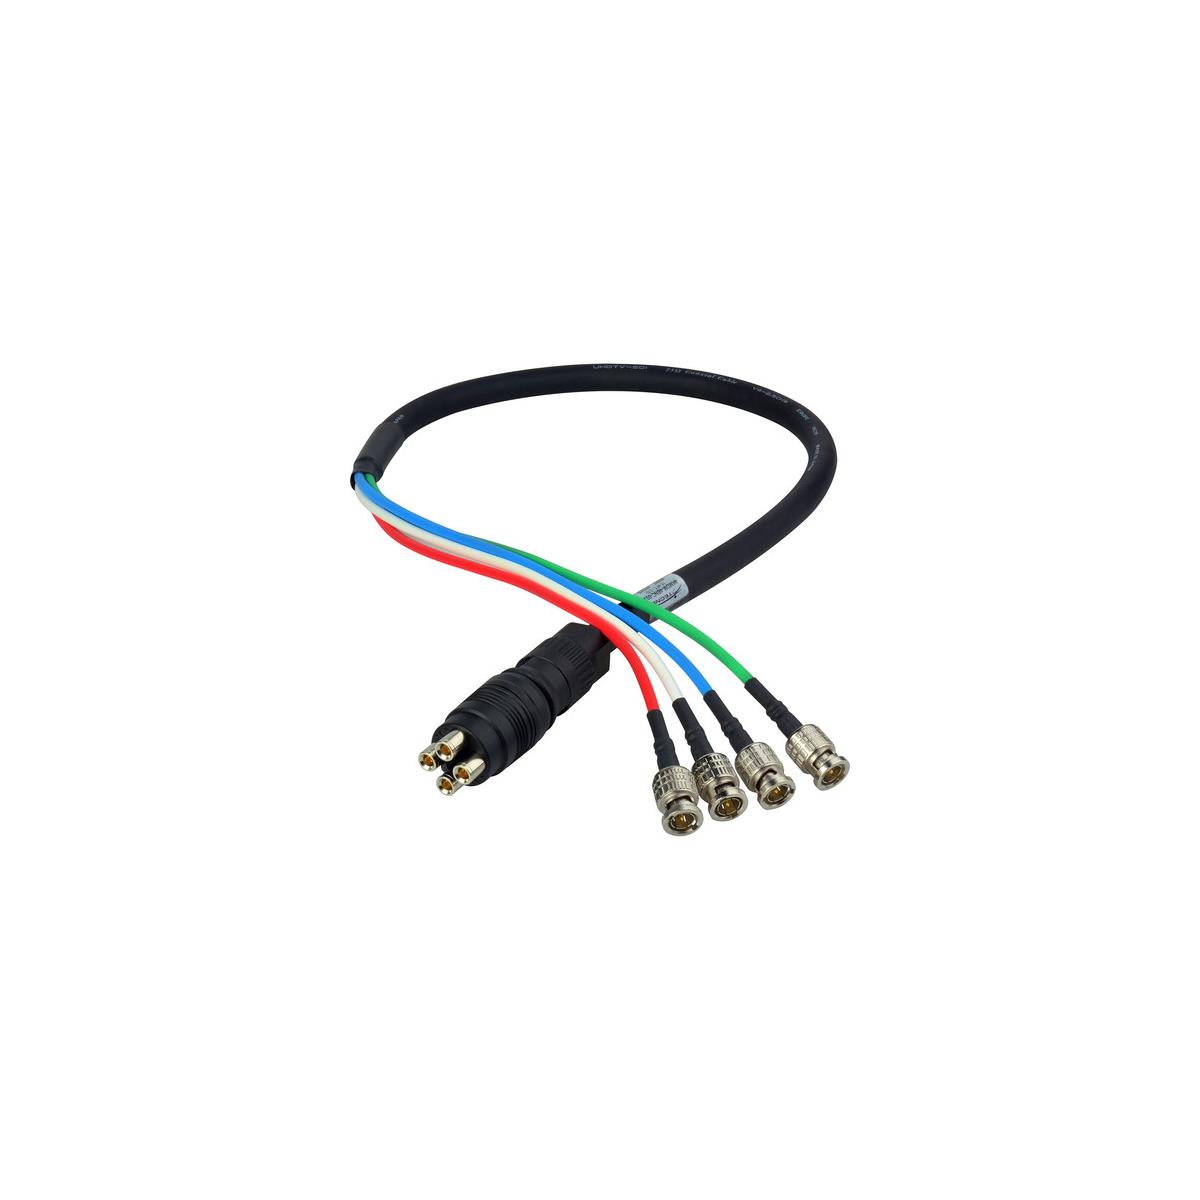 Laird 50' 4K UHD 3G HD-SDI 4-Channel DIN Male to BNC Camera Breakout Cable <b> 4-3G HD-SDI Signal Channel Quick Connect System for 4K/UHD Video Formats </b>One step, quick-connect Laird coax Canare cable assemblies connect 4 channels of 3G HD-SDI signals for 4K/UHD video formats. The Laird cables are assembled with Canare 4 channel, V4-2.5CHW flexible coaxial cable, allowing a break out to 4 Canare BNC or 4 DIN connectors. The Canare male connector, MDM-V4C25HW is designed to mate with the MDF-V4JRU panel mount receptacle which features a 4 DIN pass-through on the back side to increase your connectivity but not your rack space. Laird 4K UHD Canare camera cables assemblies make quick work of keeping everything in line and organized. Available in a variety of lengths. Use with the Canare MDF-V4JRU 4K DIN 1.0/2.3 4-channel chassis mount connector.• Quick connect and disconnect• Multiple 3G-SDI signals to 4K/UHD formats• Canare cable with solid and lightweight nylon resin body• Push-pull locking Canare coax connectors with protective rubber boots• High performance Canare BCP-B25HW BNC or 4 DCP-C25HD DIN connectors• Made in the USA in a Canare trained fiber shop• Canare V4-2.5CHW 4-Channel 4K 75Ohms Coaxial Cable• 4 DIN 1.0/2.3 connectors• MDF-V4JRU accepts MDM-V4C25HW and also DIN 1.0/2.3 plugs<b> Applications </b>• High density 3G-SDI• applications• Mobile trucks• Fly packs• Studios• 4K transmission• Consolidate HD-SDI lines